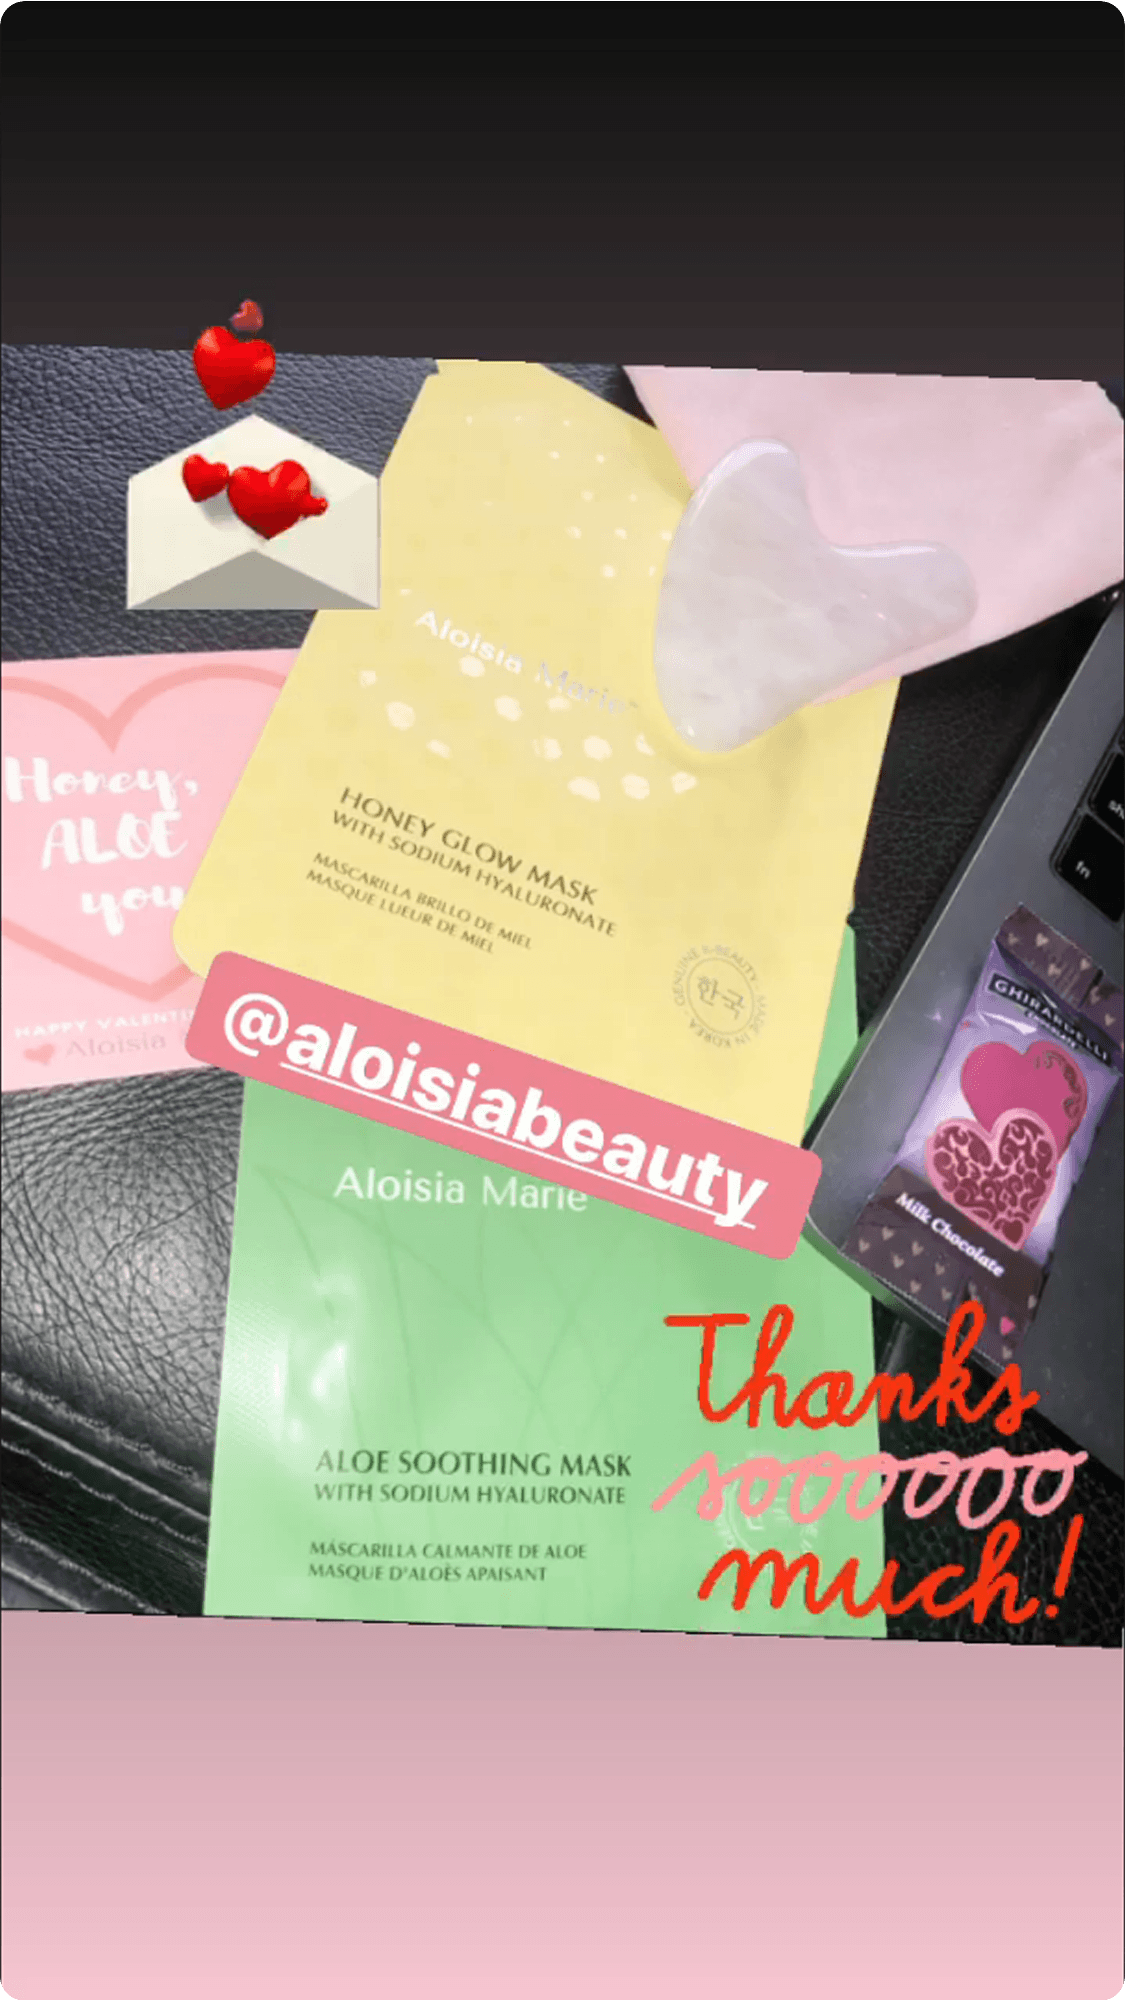 Tara Wallace Mentioning Aloisia Beauty in her instagram Stories